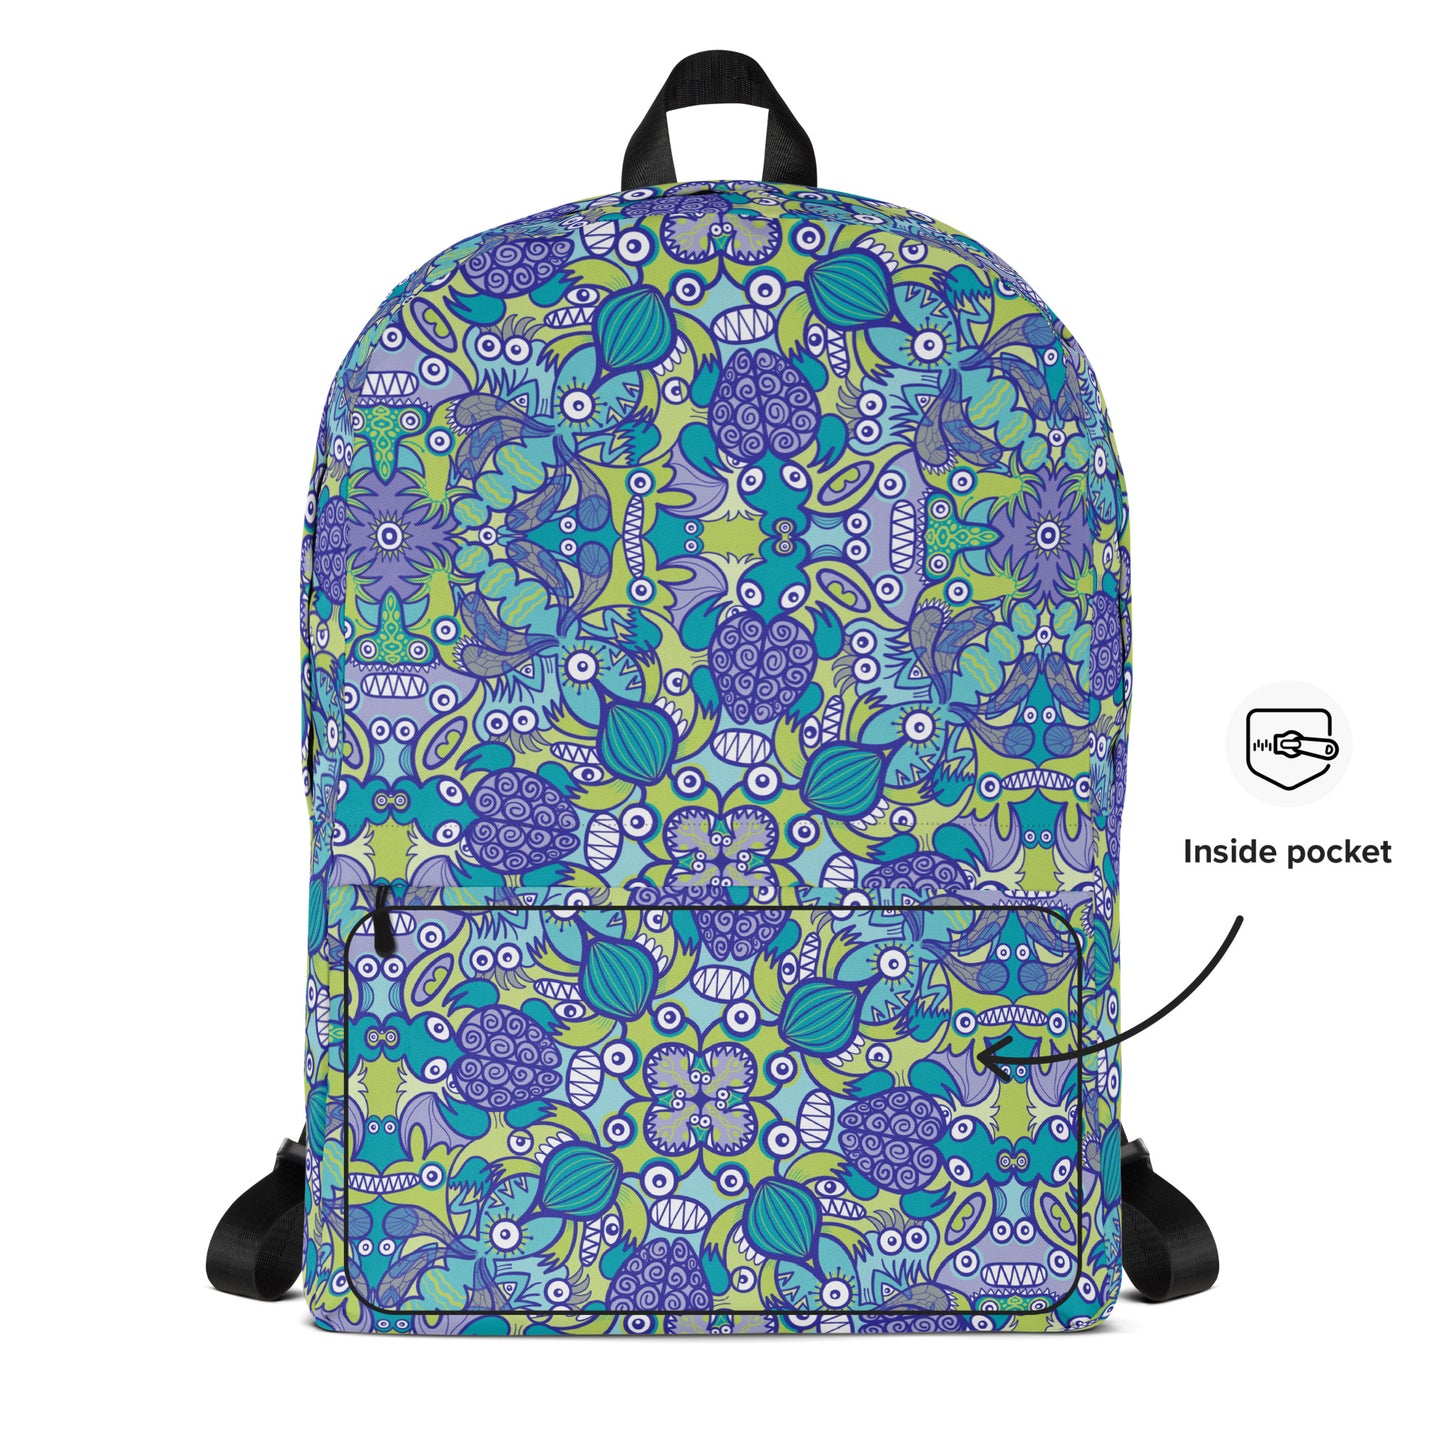 Once upon a time in an ocean full of life Backpack. Product details